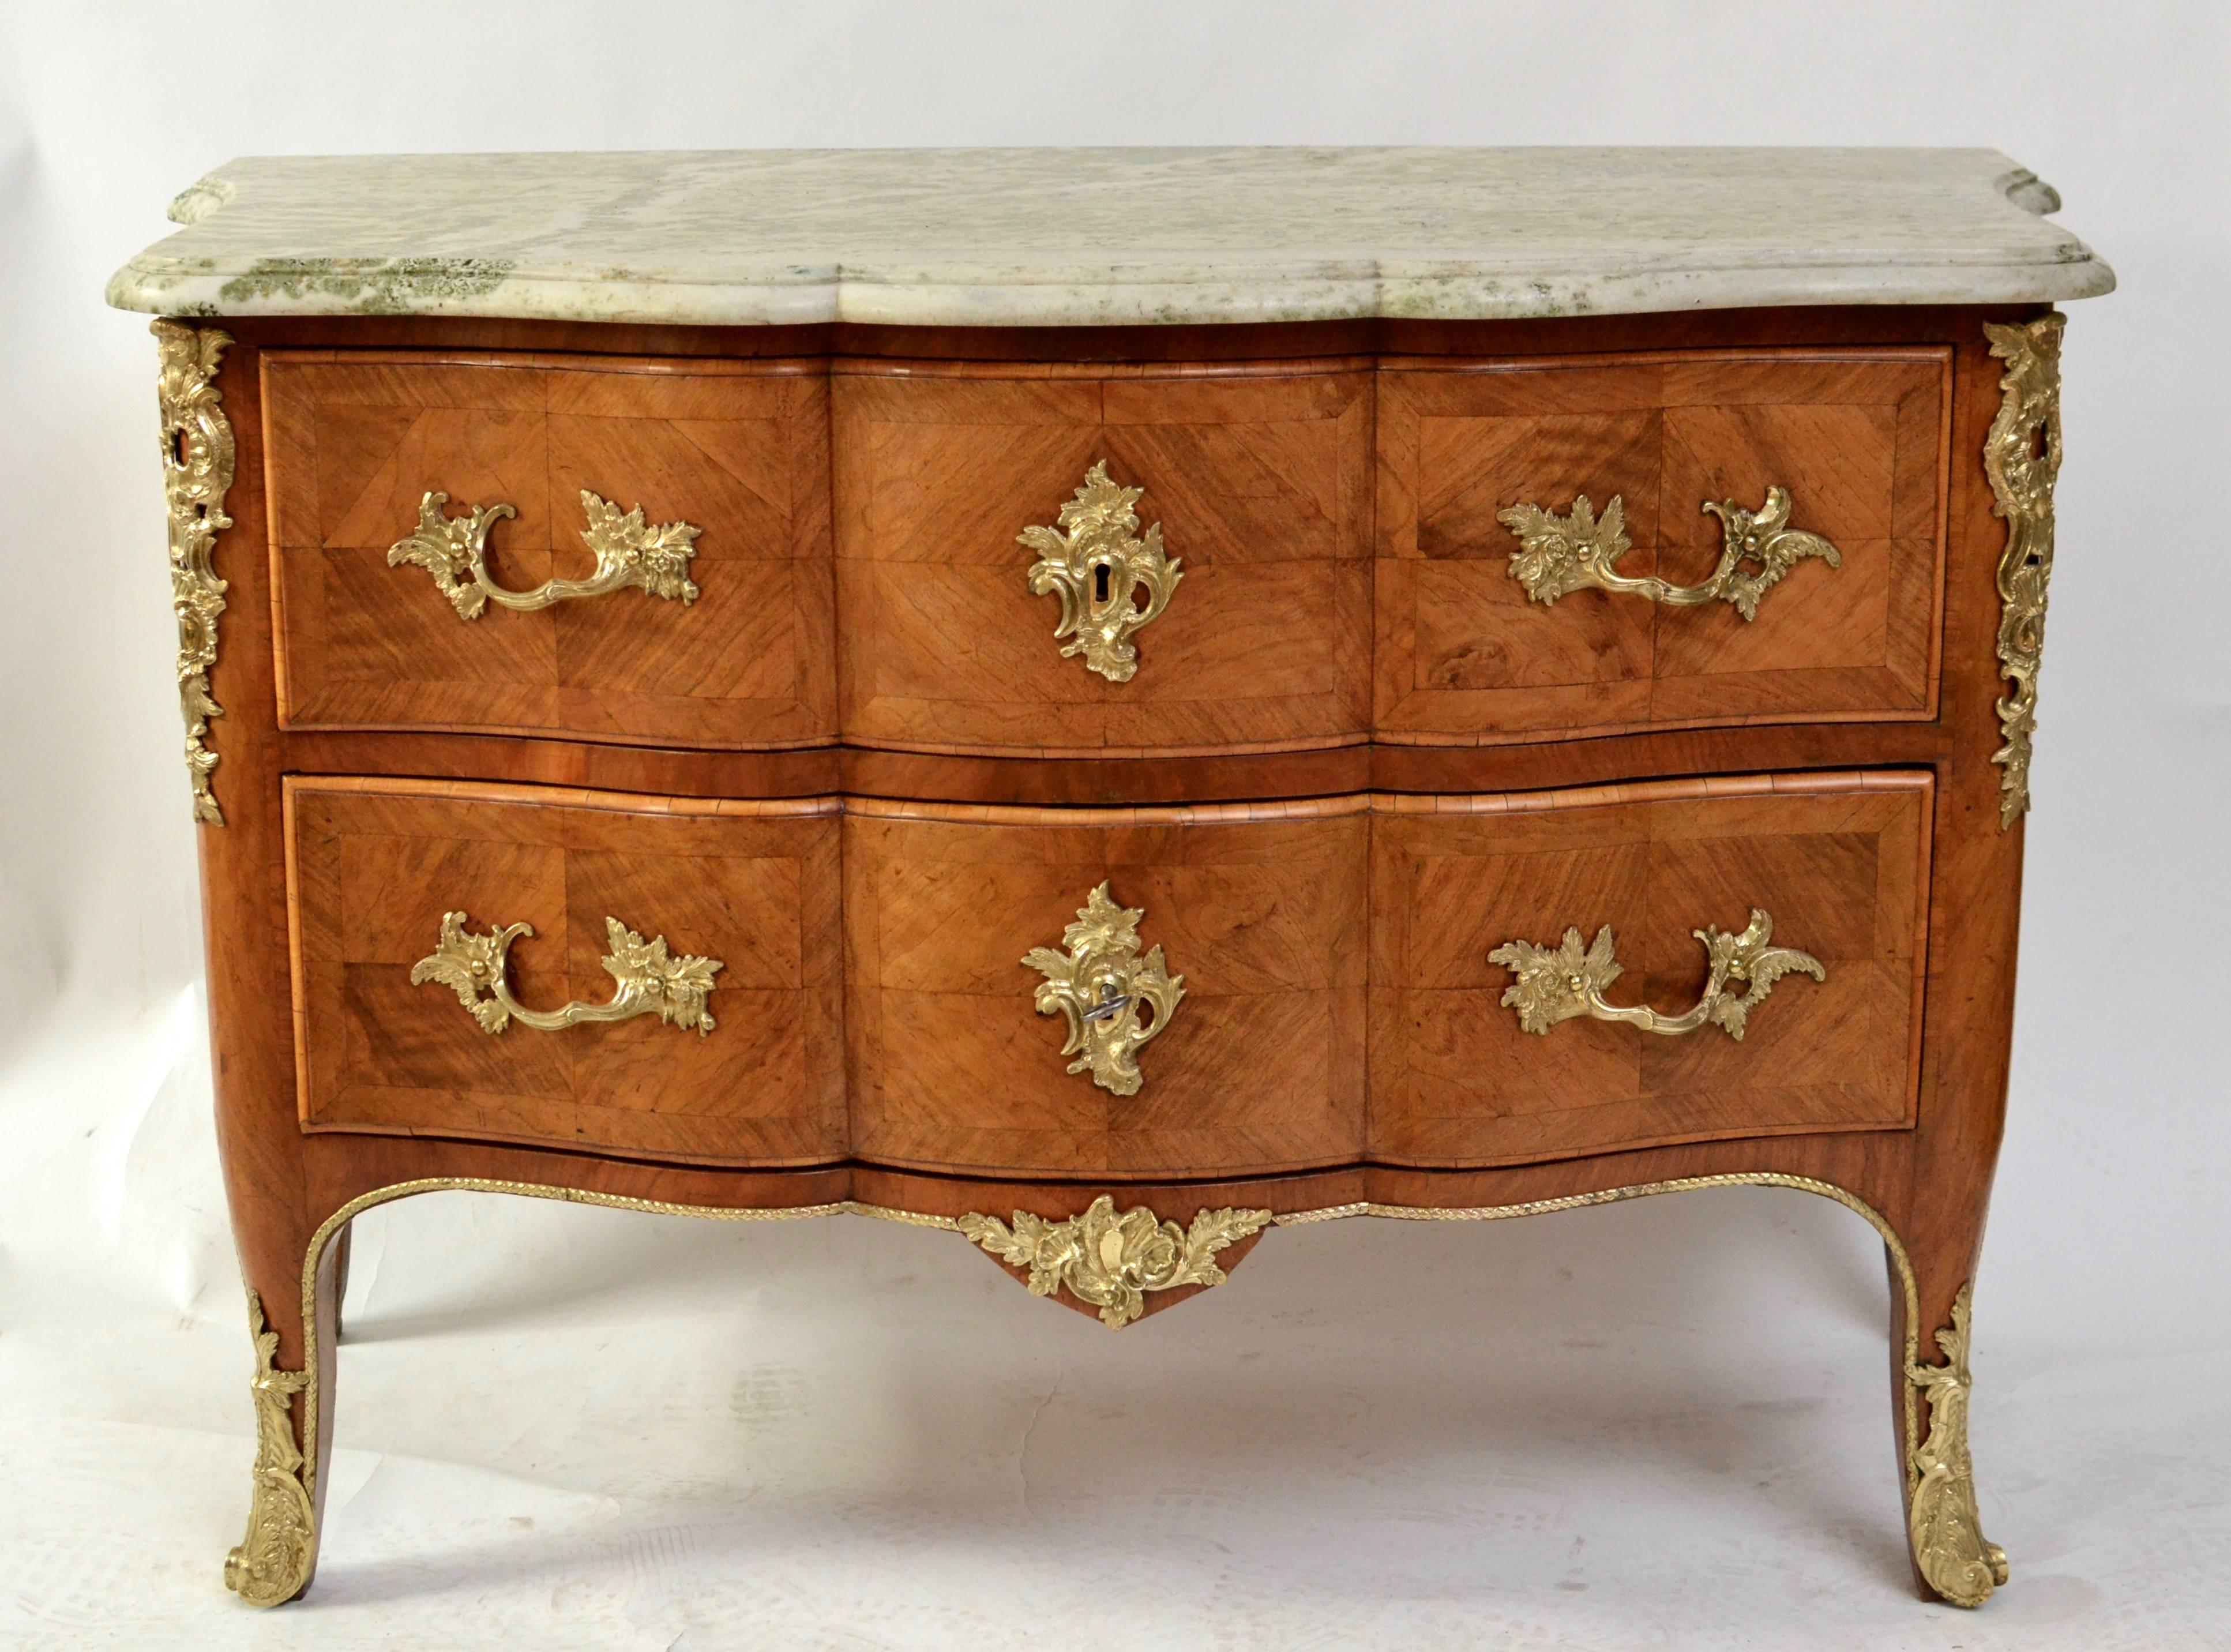 A very fine and important Swedish Rococo ¨commode en console¨by Olof Martin, master in Stockholm 1736-1764. Veneered with walnut and with it´s original Swedish marble top. The commode is in a very nice original condition.
Provenance: 
Hersby Gård,